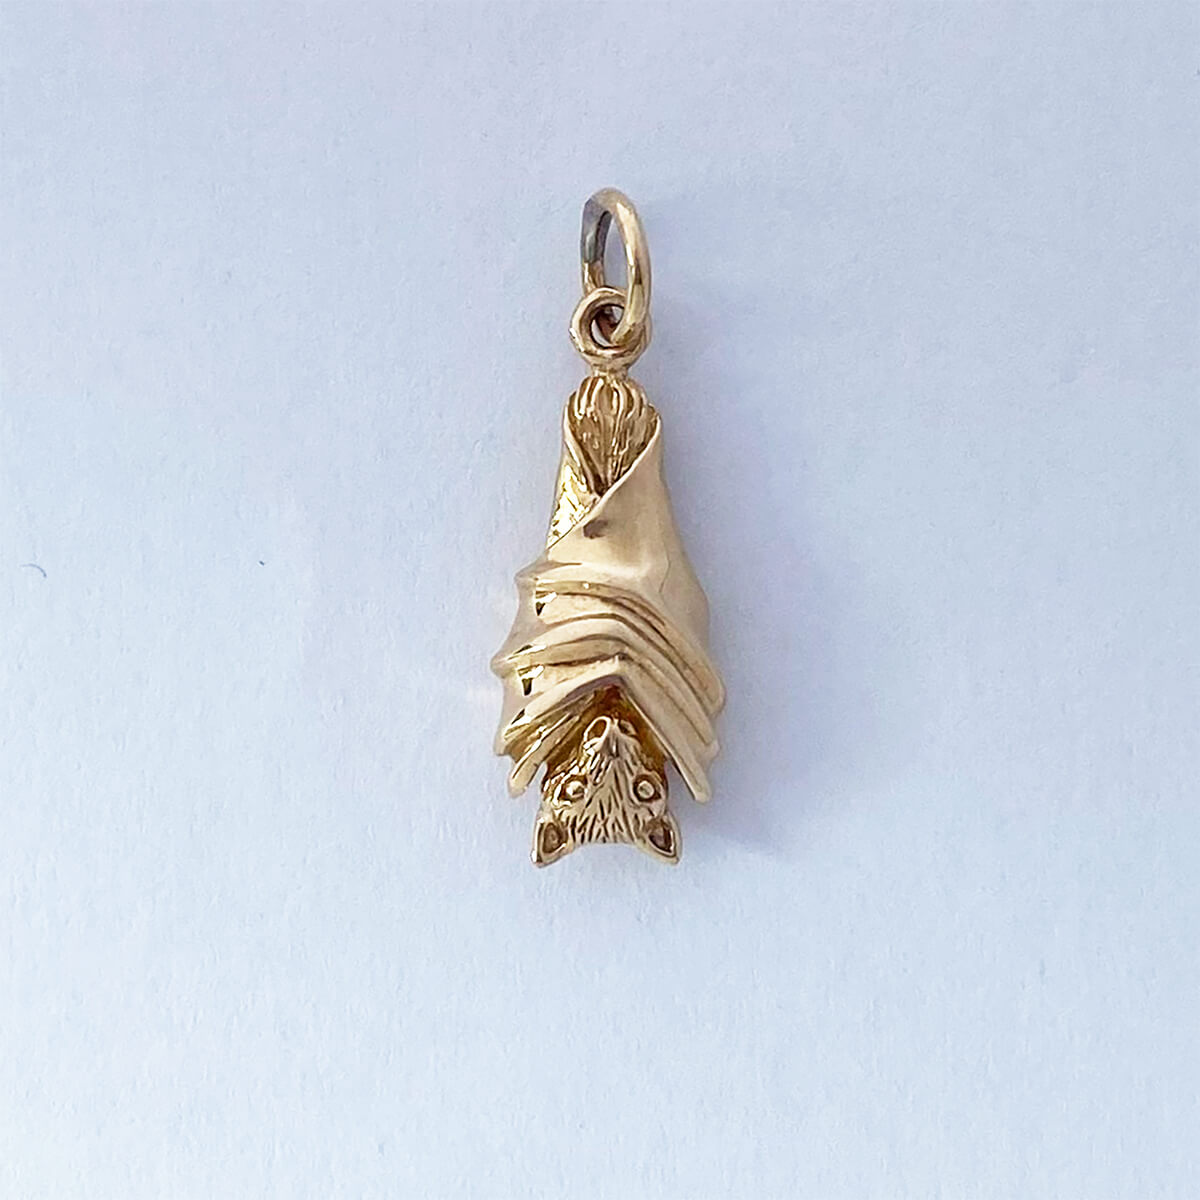 Bat pendant in gold bronze hanging with wings folded